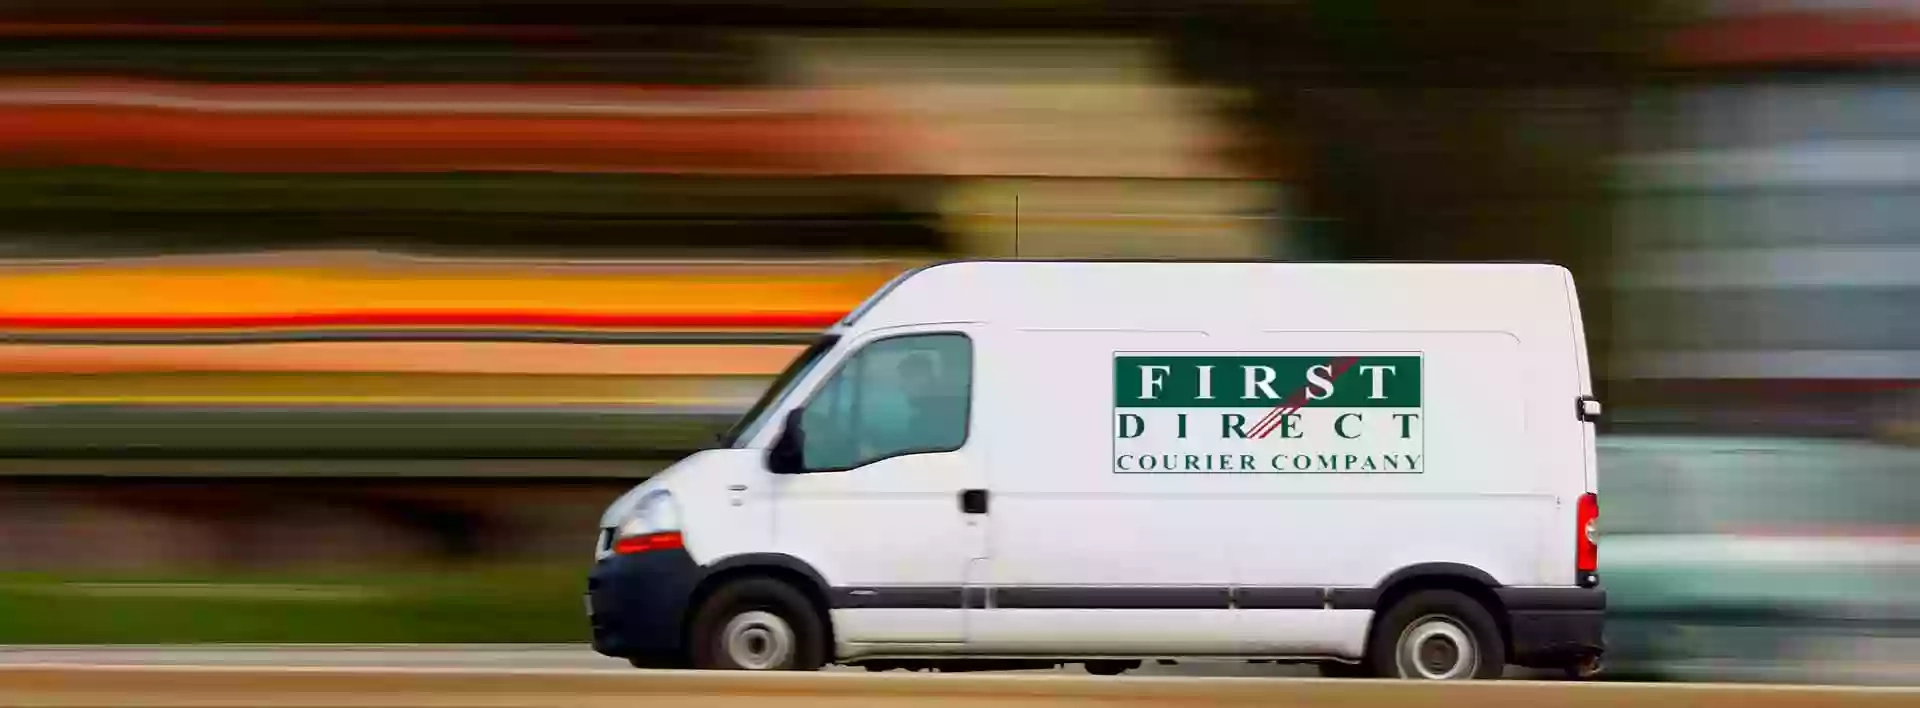 First Direct Couriers